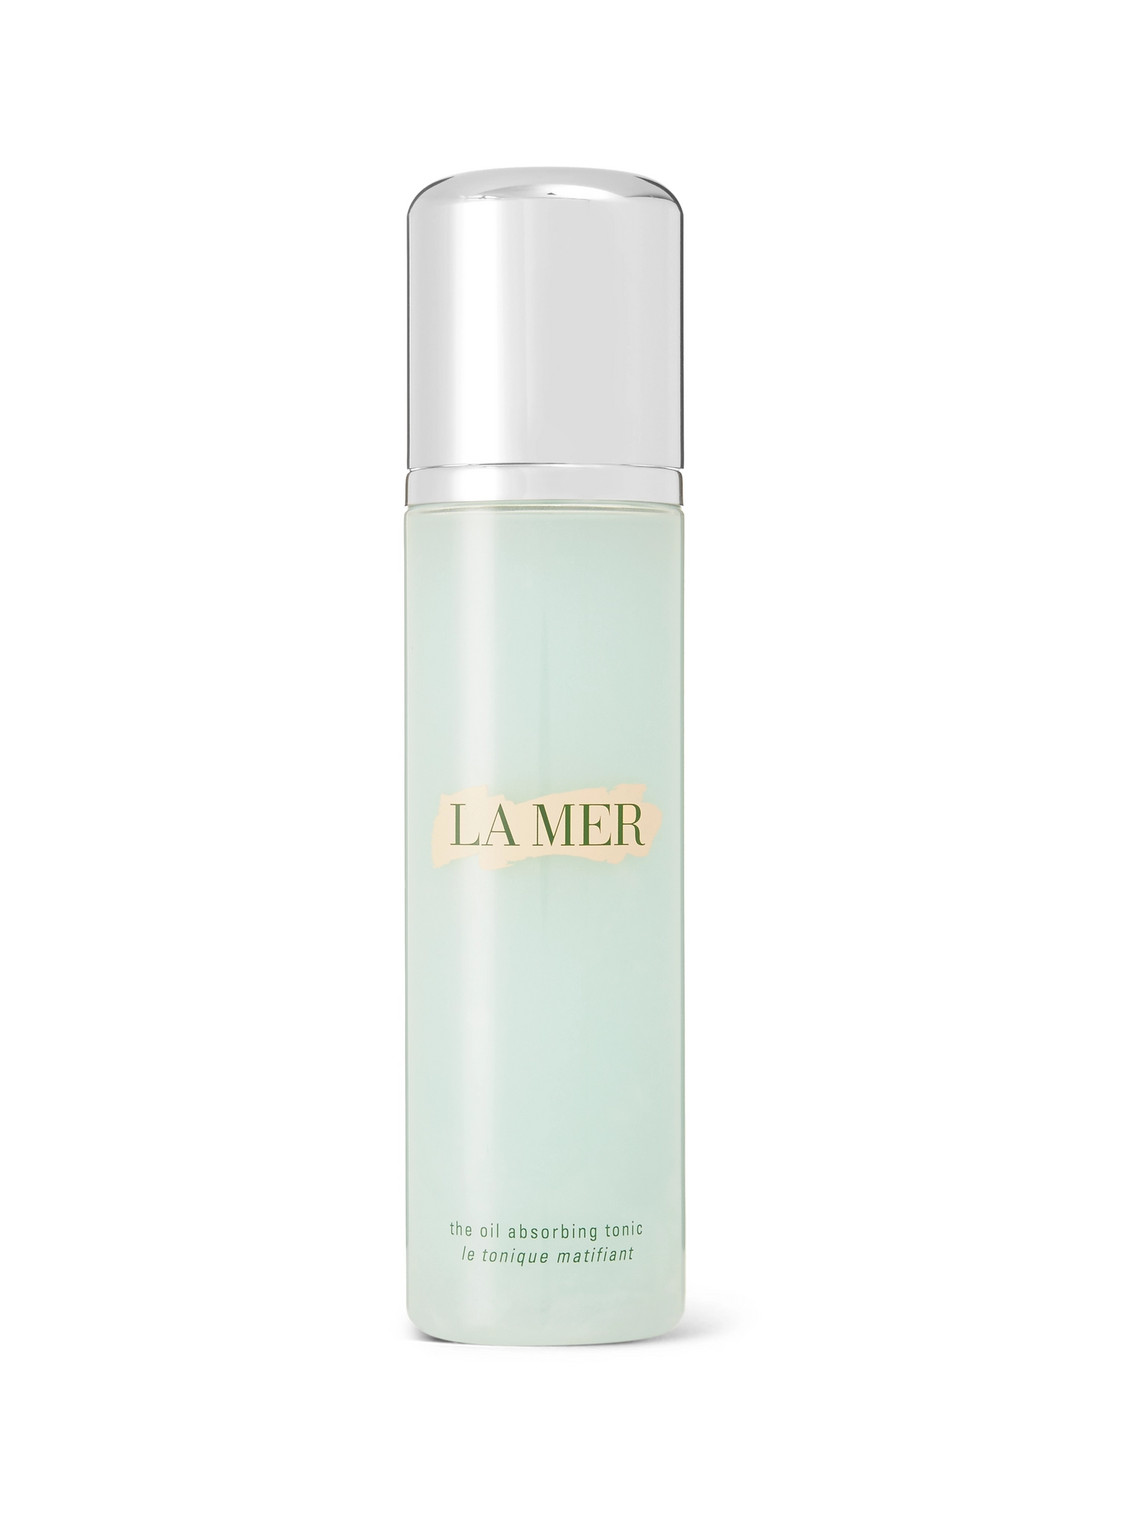 La Mer The Oil Absorbing Tonic, 200ml In Colorless